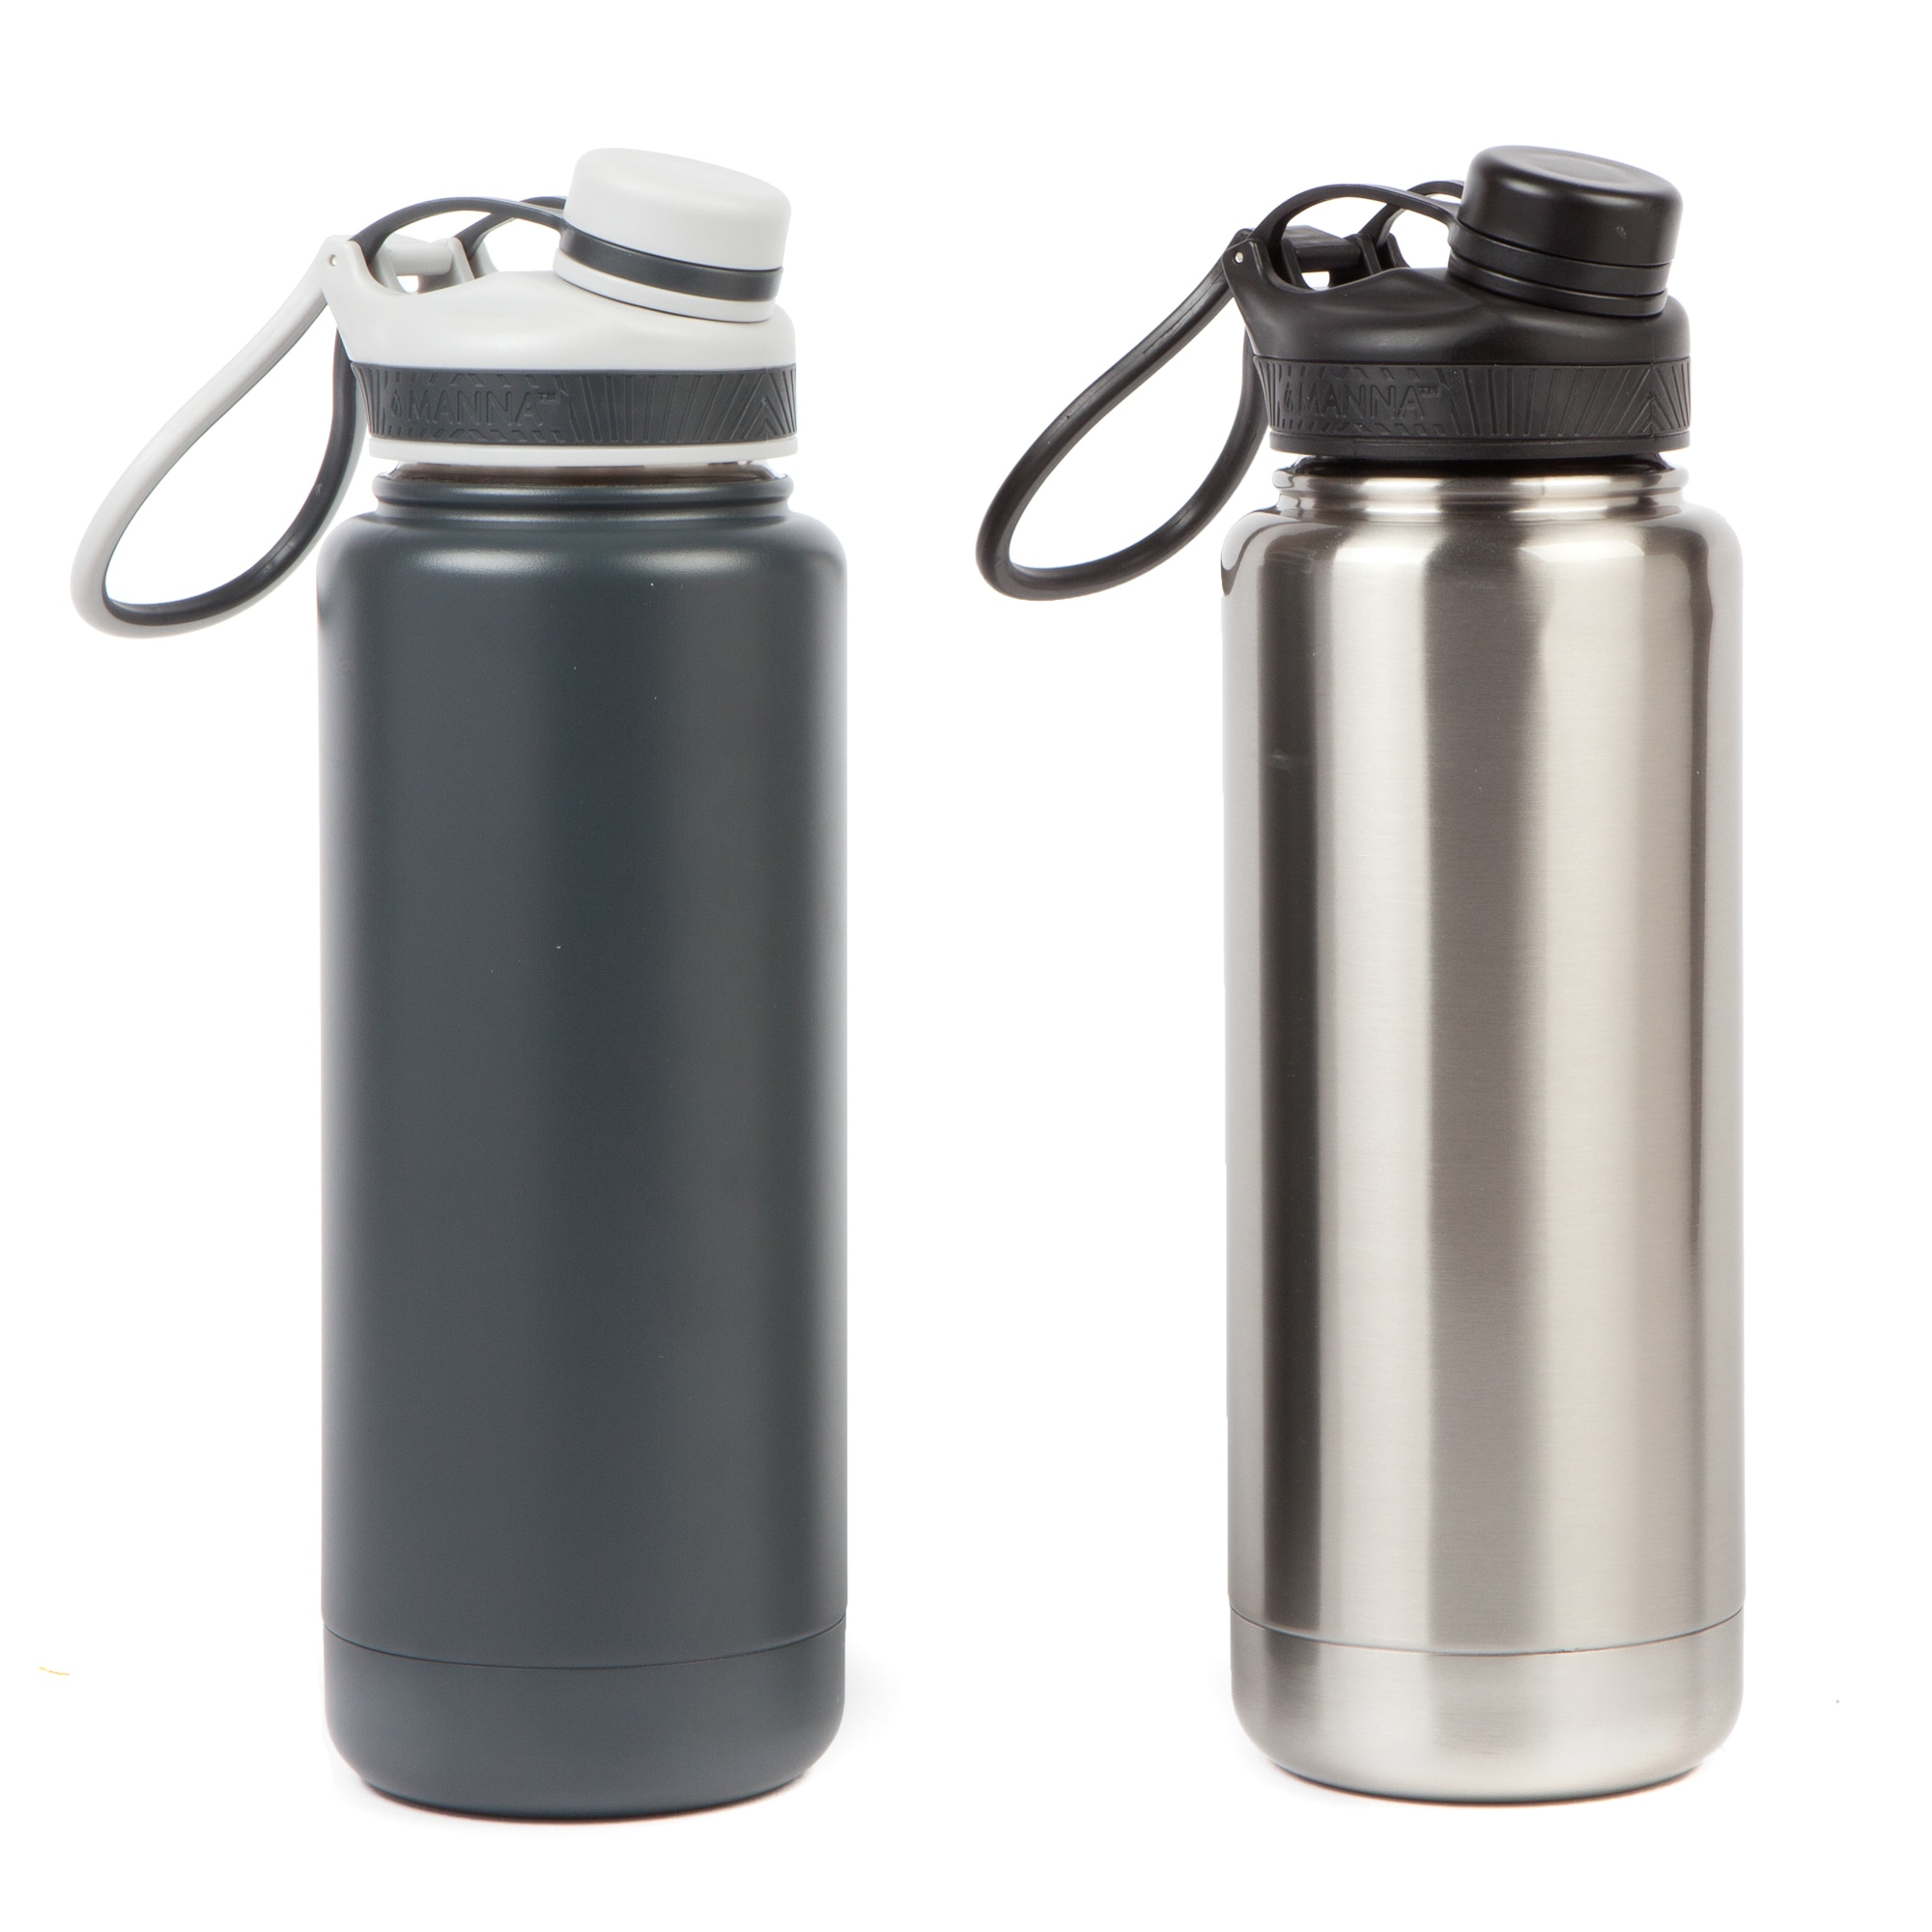 Imprinted Manna™ Thermo 40 oz. Vacuum Insulated Flask